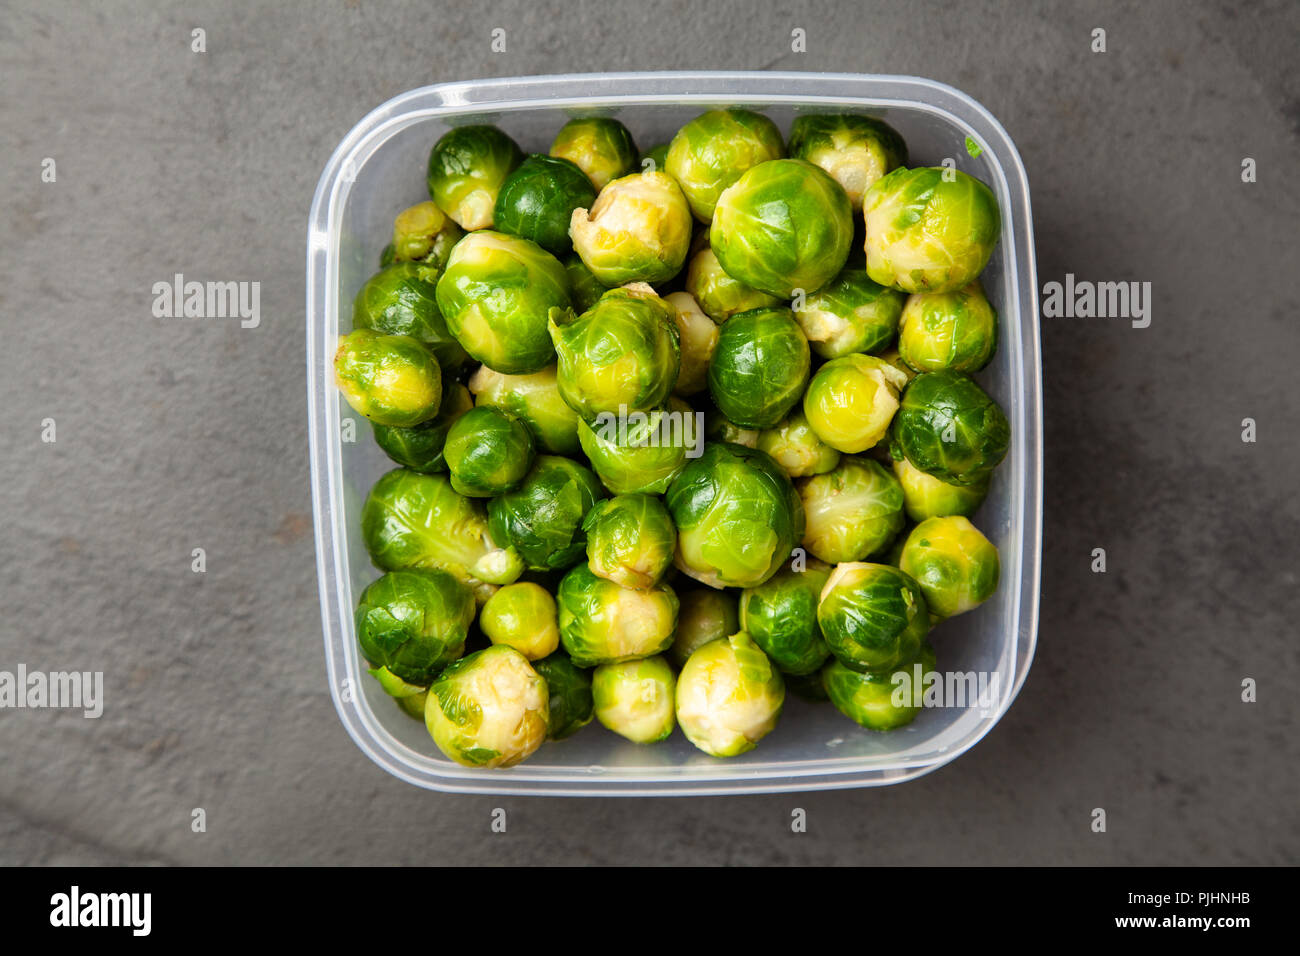 Brussles sprouts in a plastic container Stock Photo